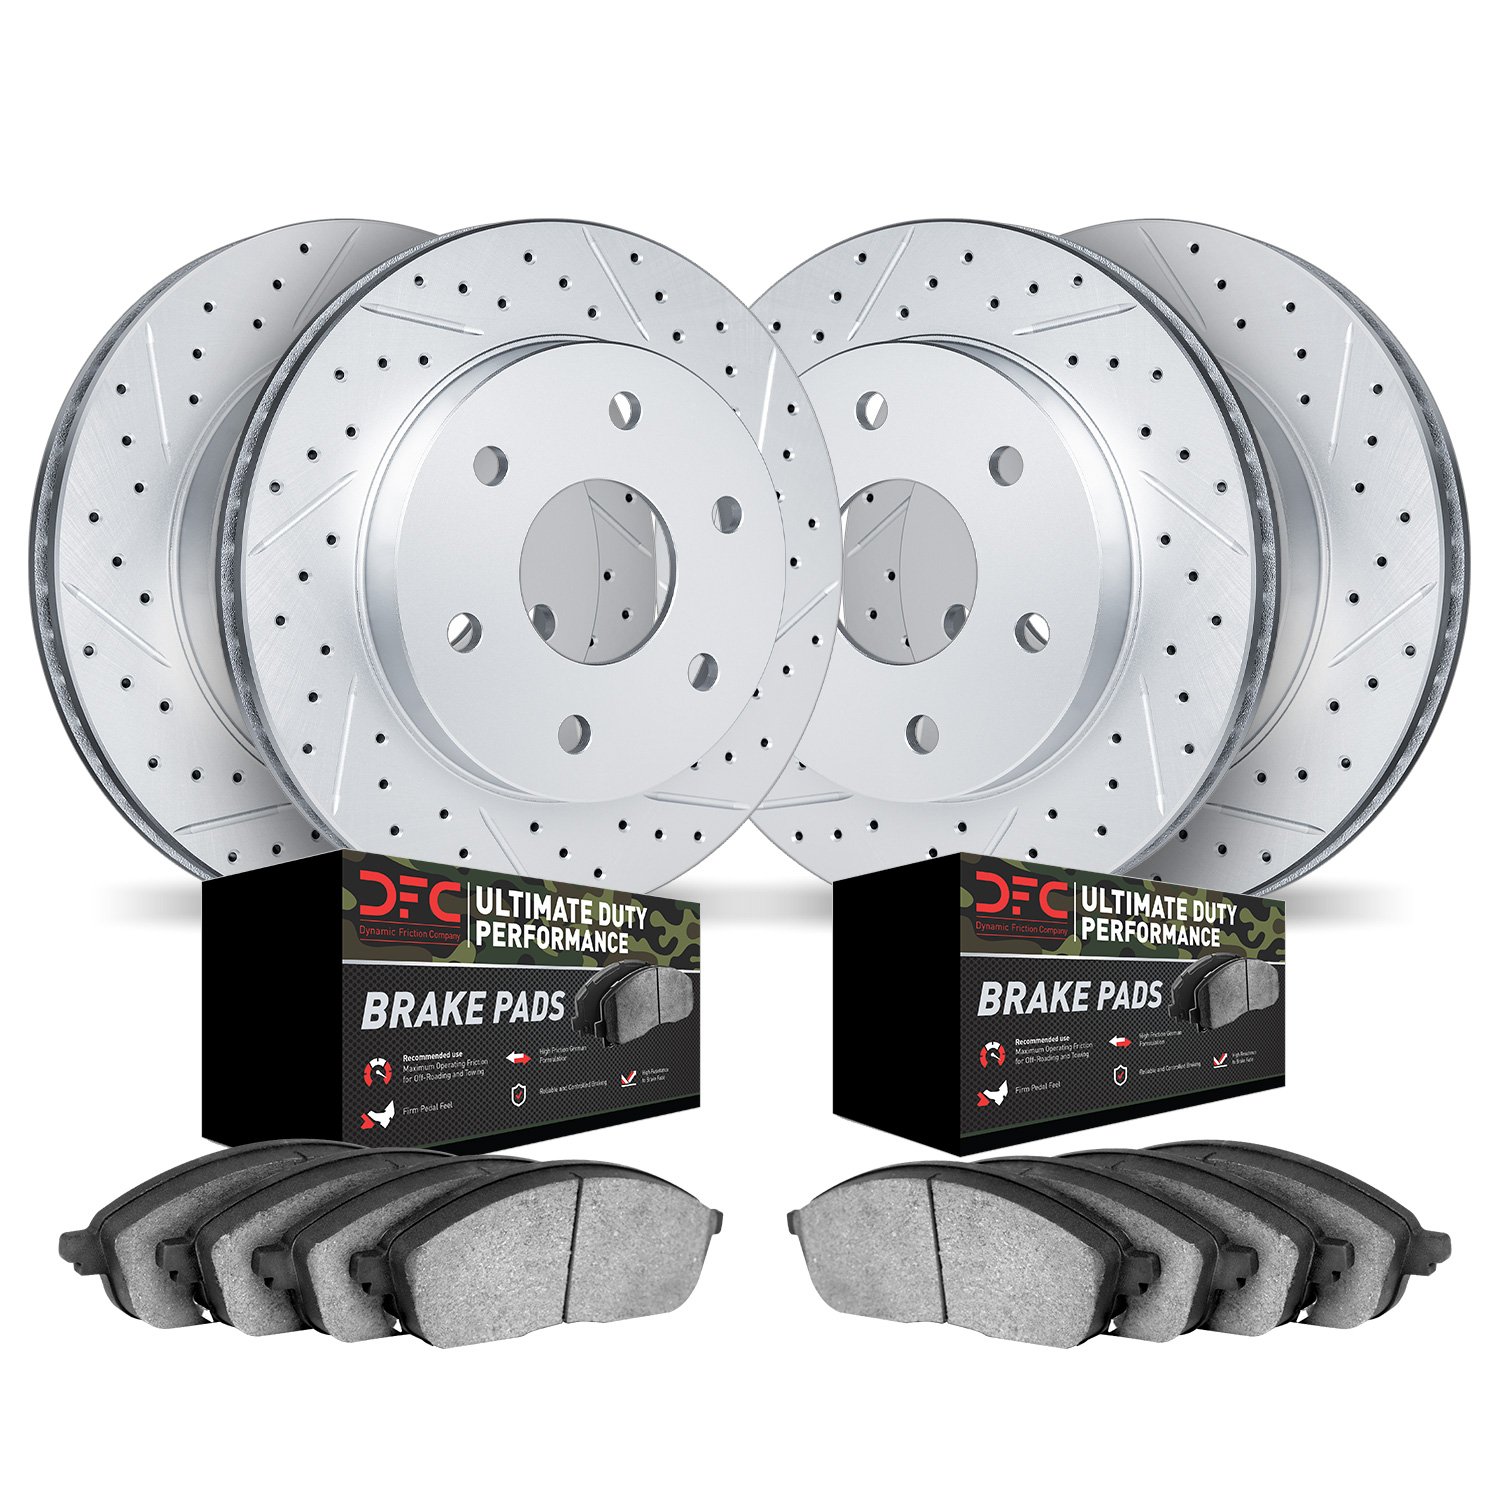 2404-76008 Geoperformance Drilled/Slotted Brake Rotors with Ultimate-Duty Brake Pads Kit, Fits Select Lexus/Toyota/Scion, Positi